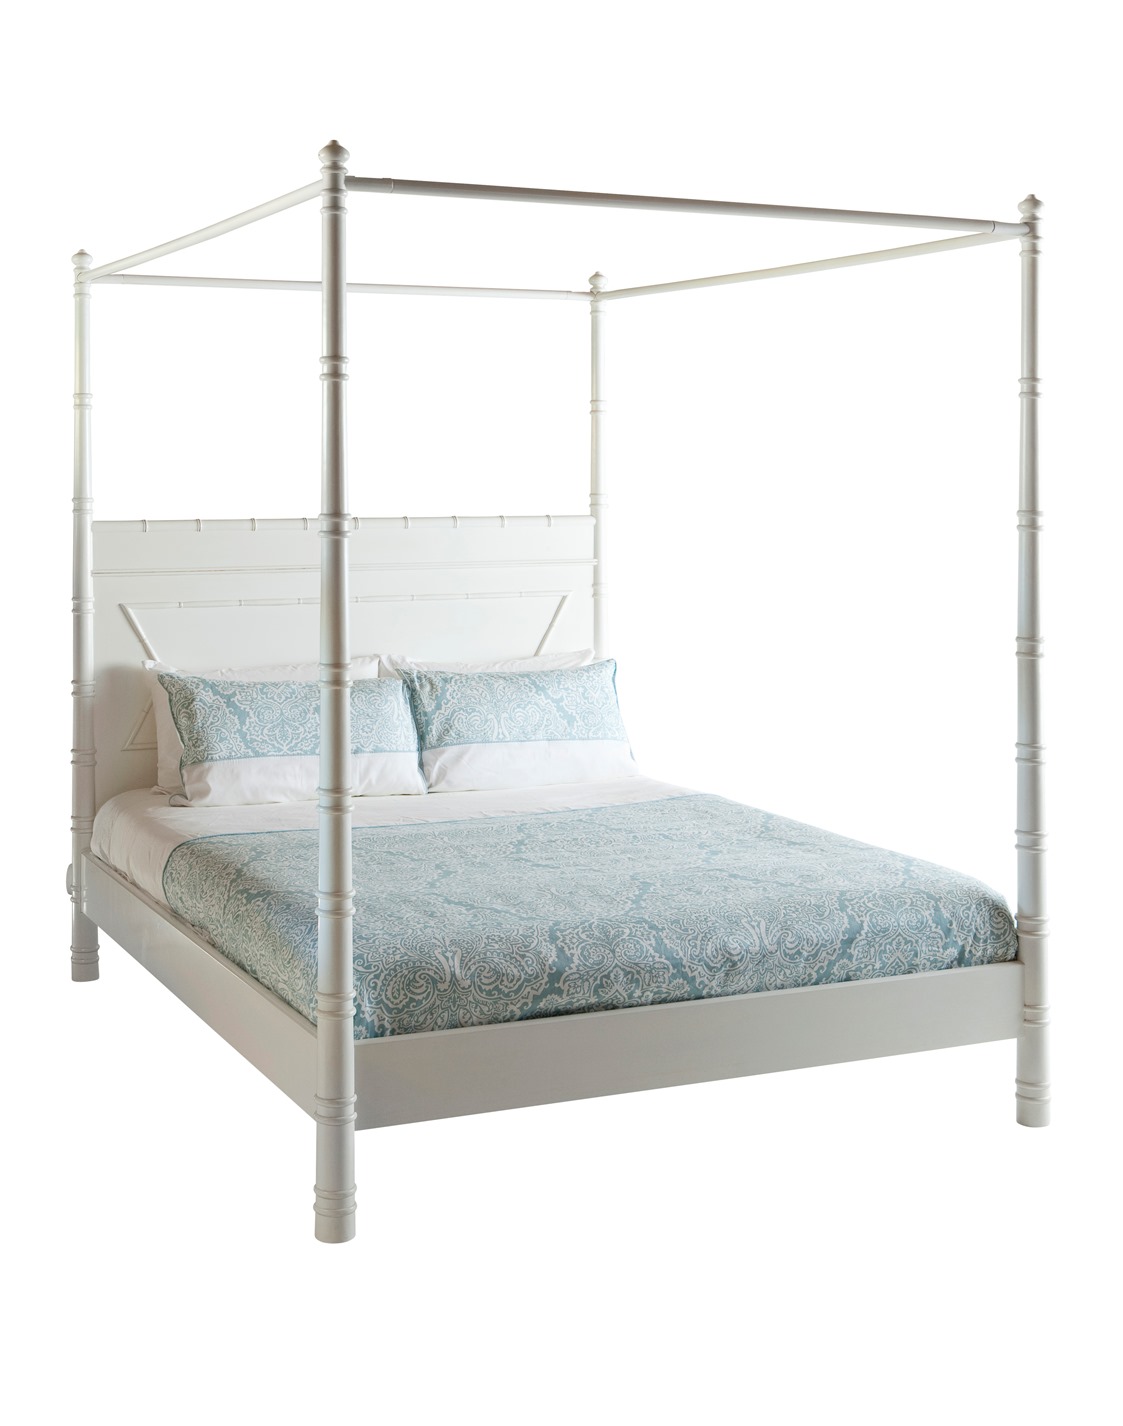 Cayman 4 Poster Bed King